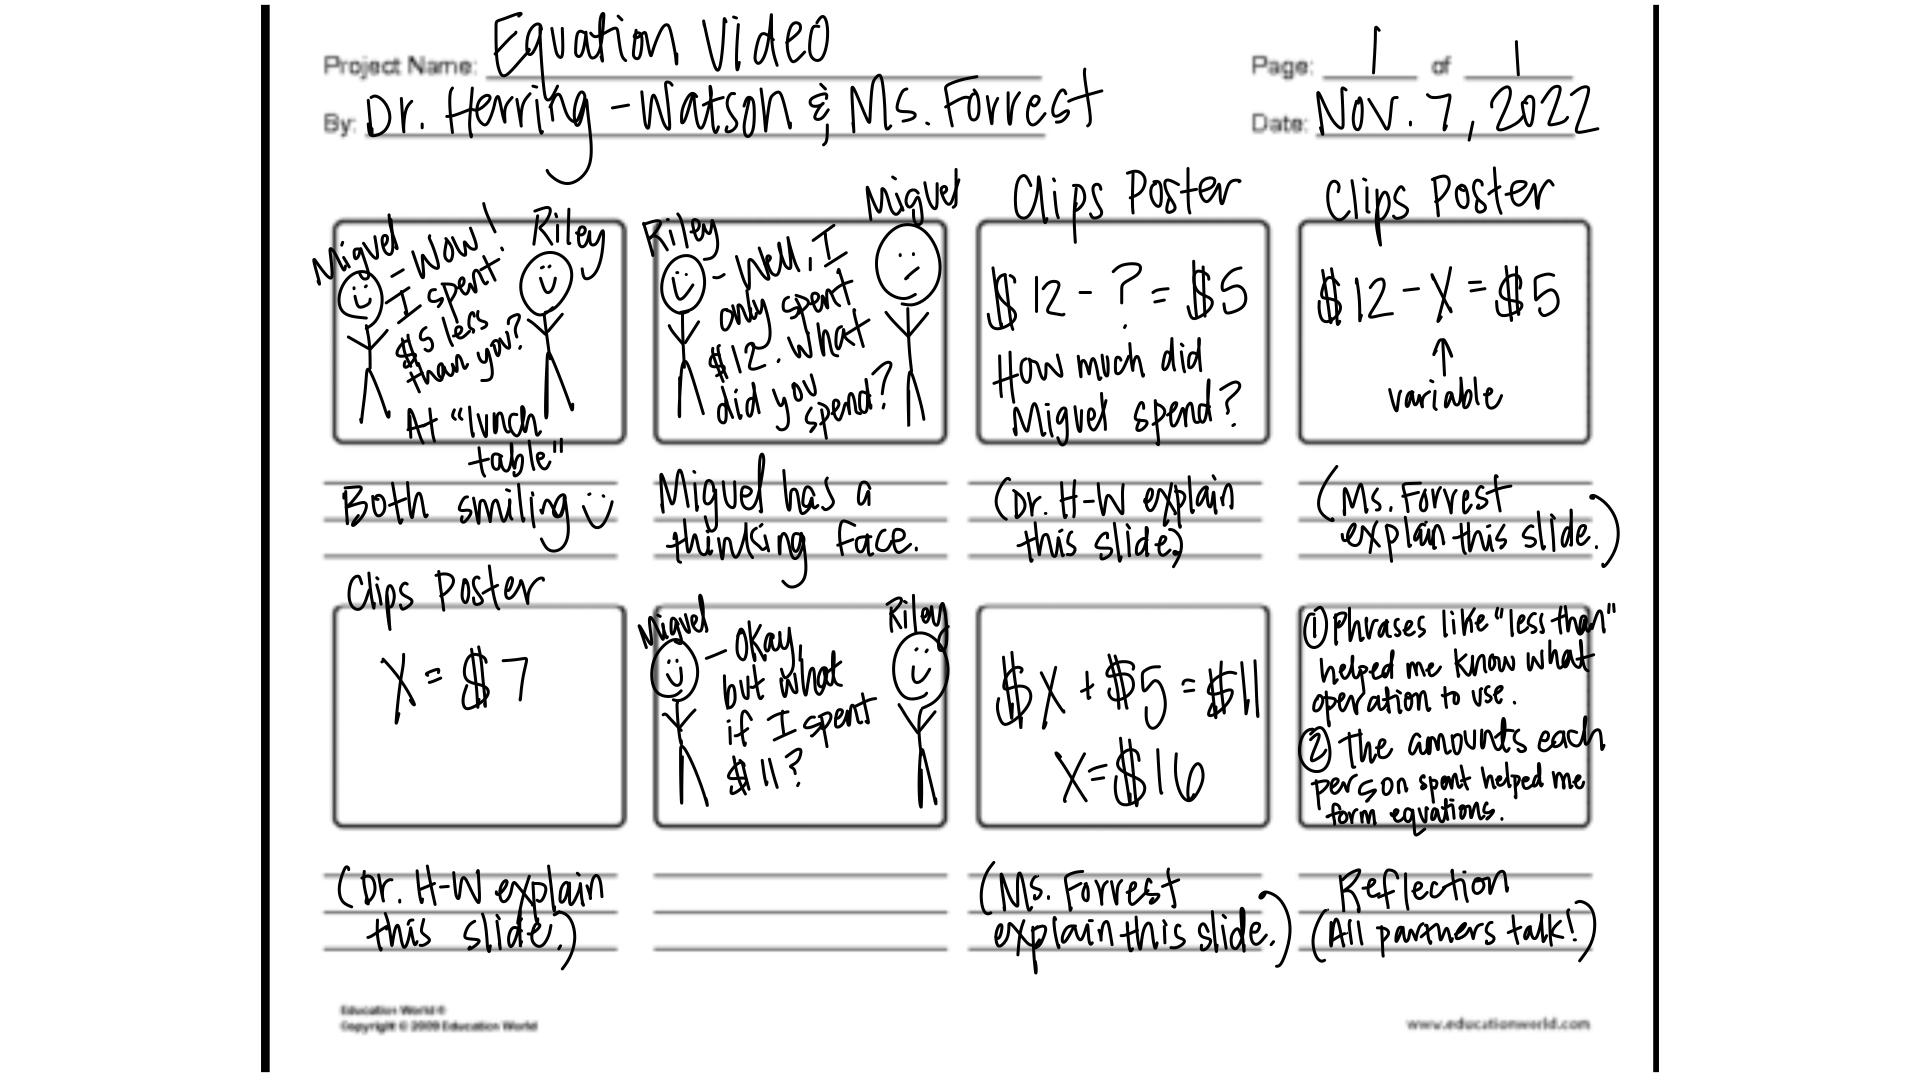 Example storyboard containing stick figures and speech bubbles to plan for video creation in Clips